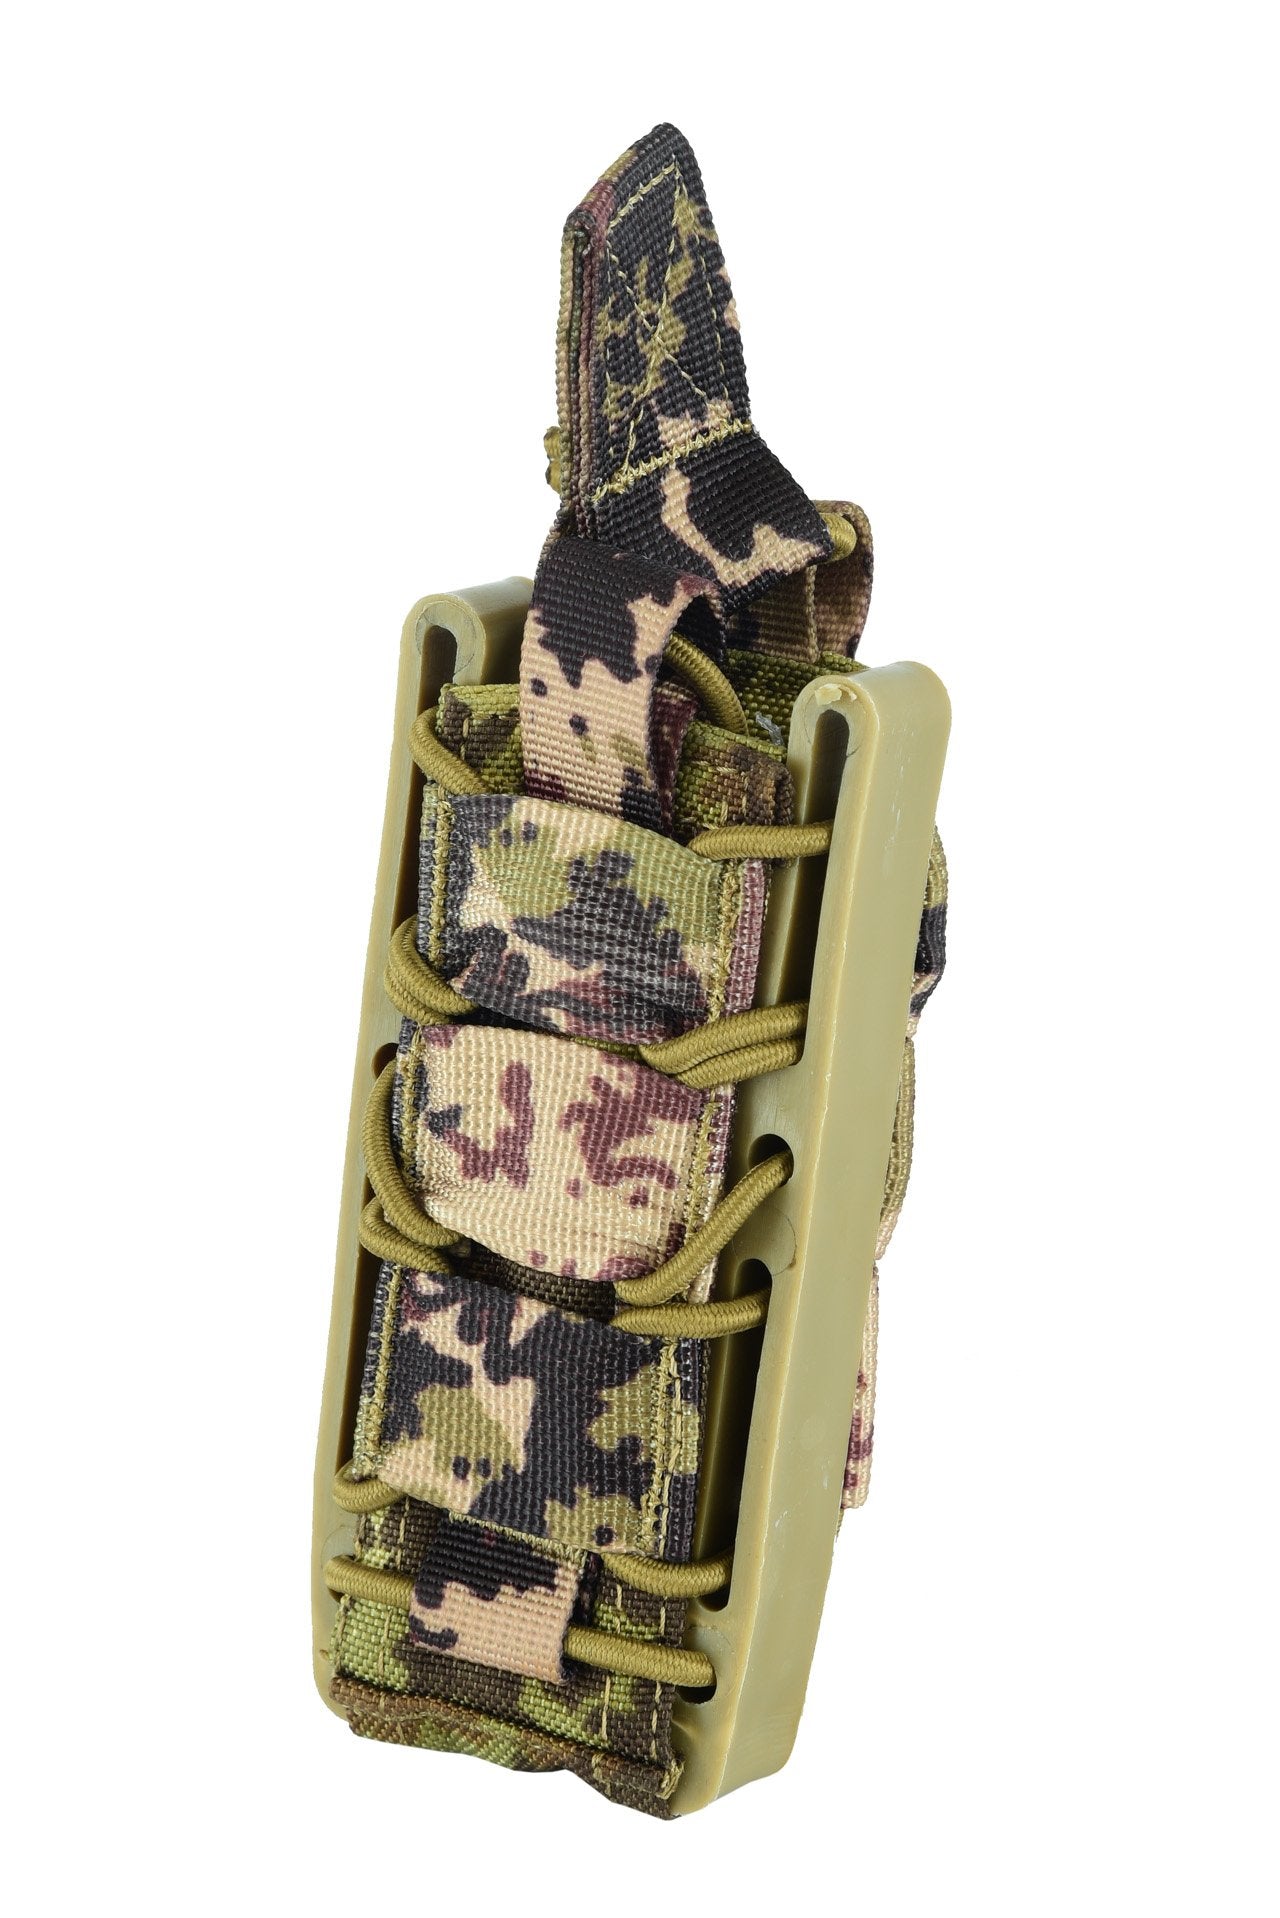 SHE-21021 Rapid Access Pistol mag Pouch